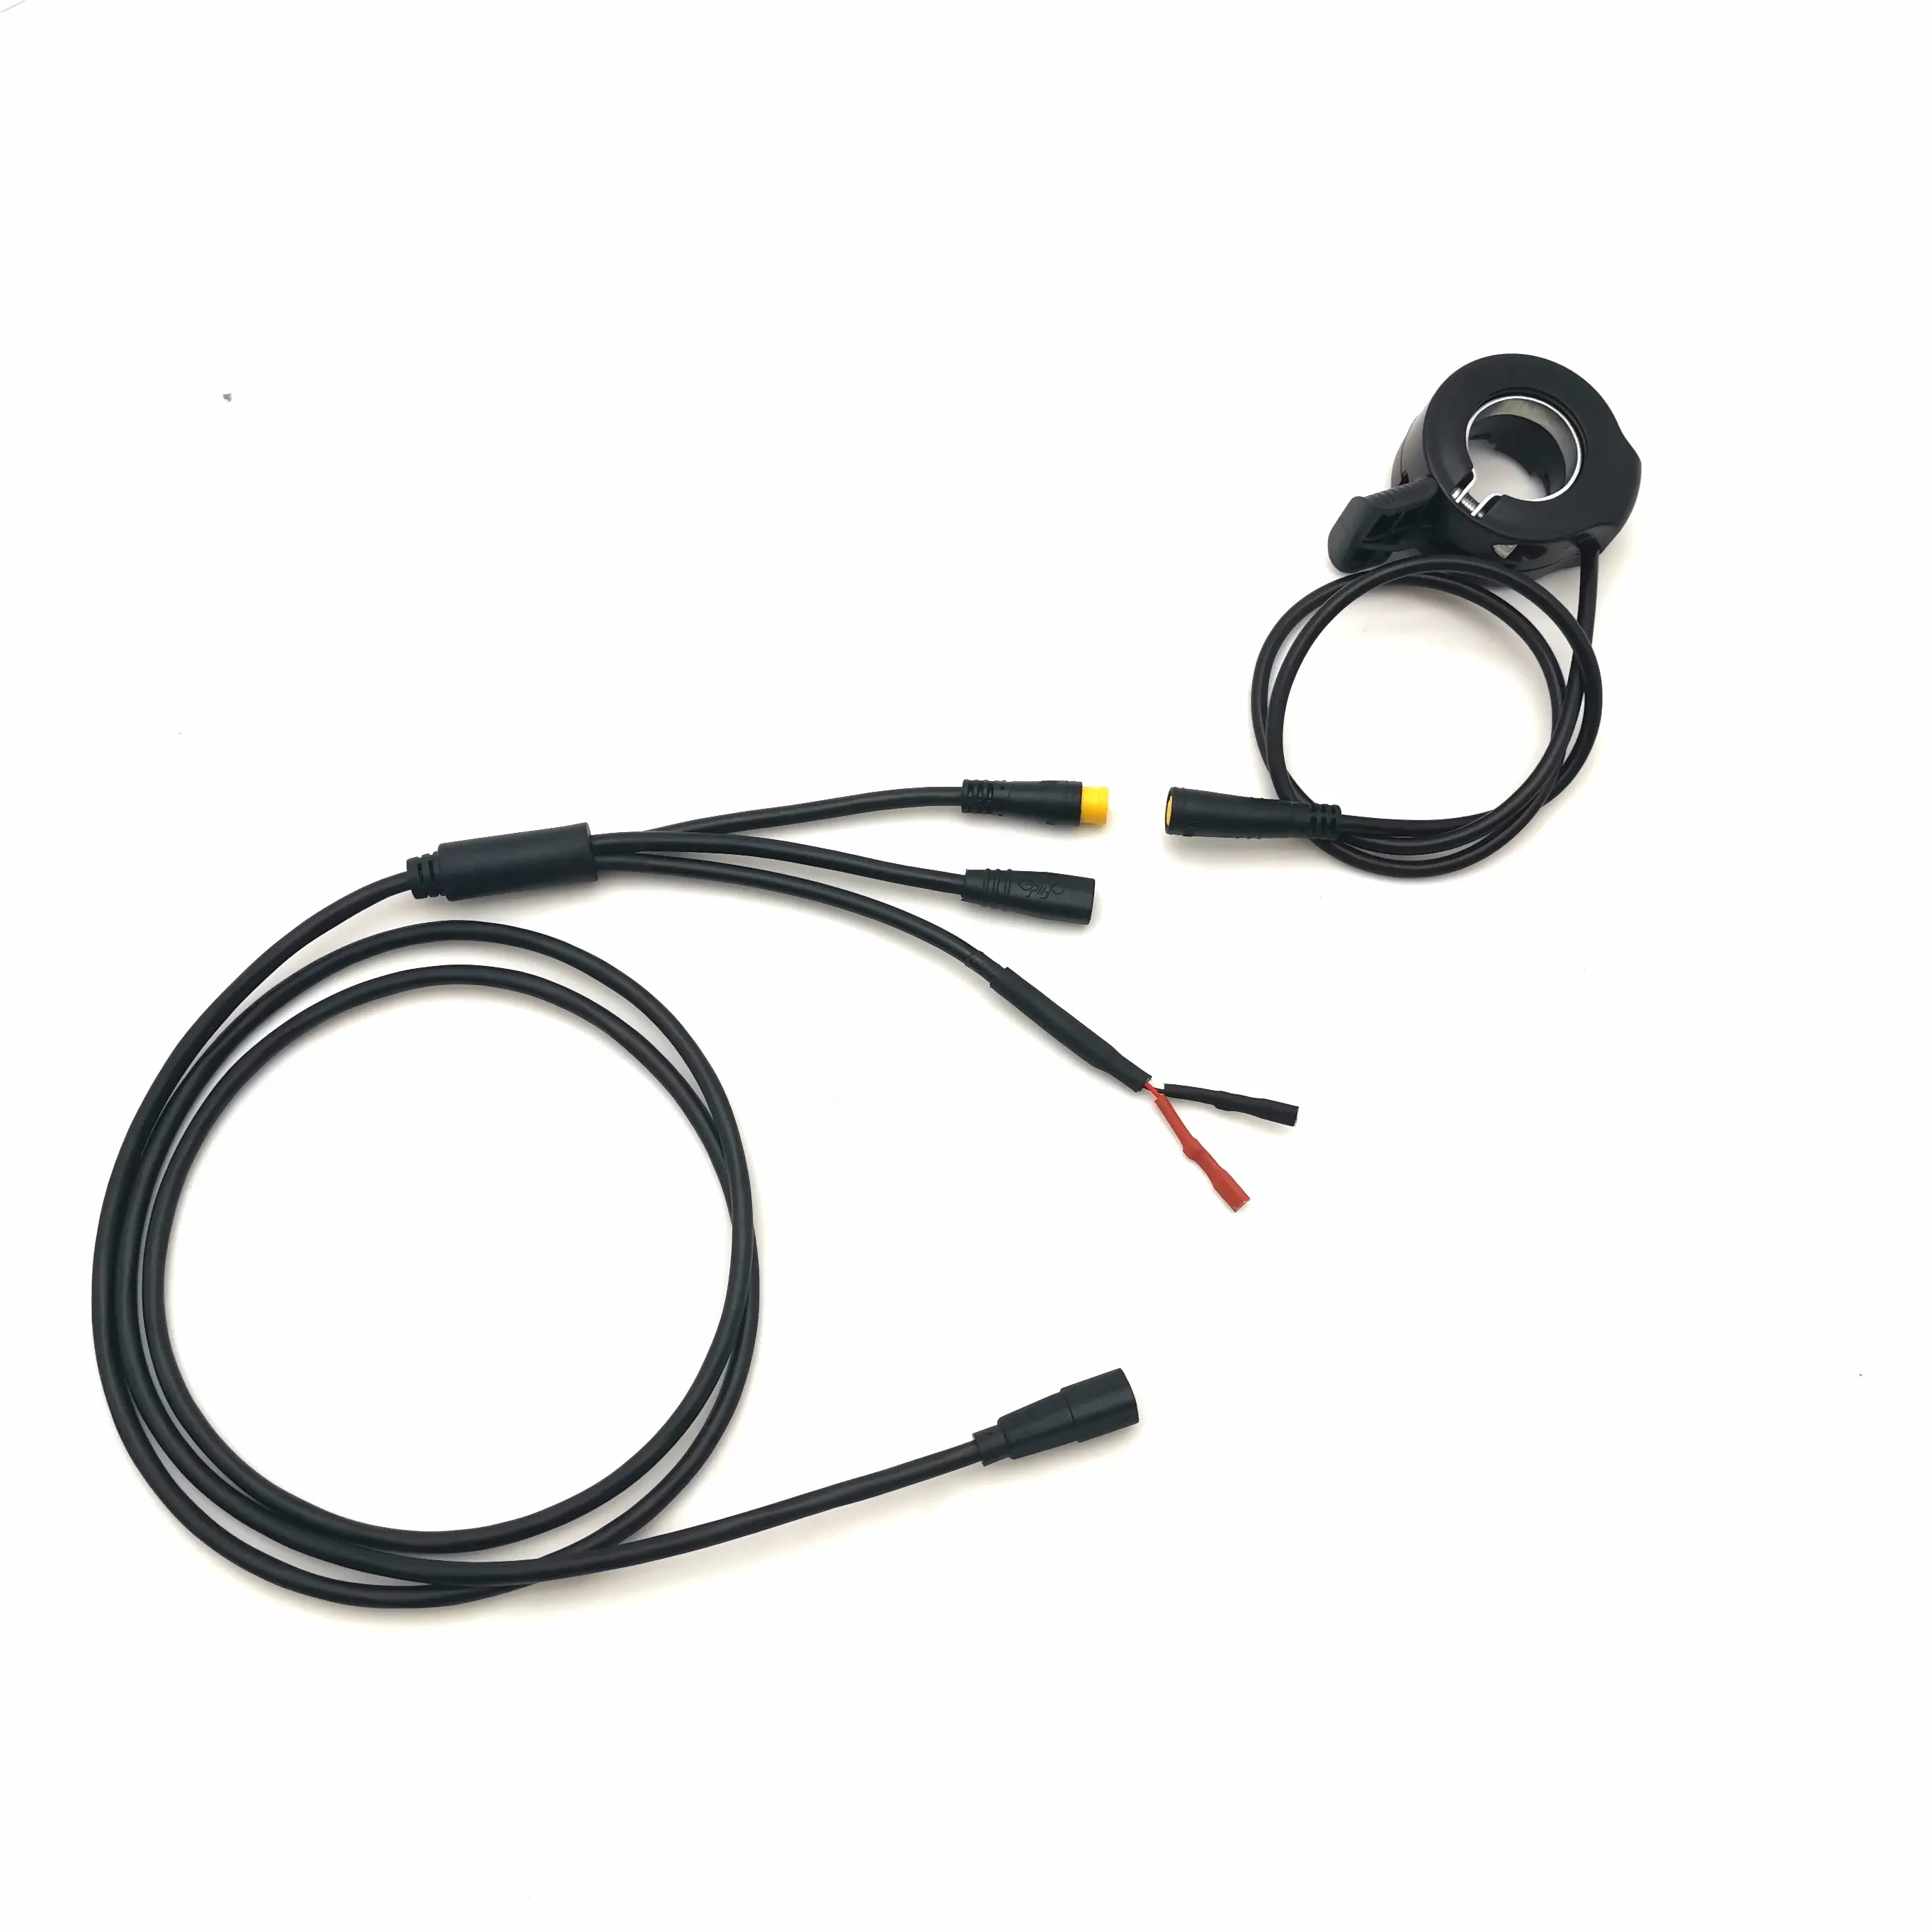 Ebike bafang 1T3 Cable For M500/M600 Thumb Throttle Bafang Motor Electric Bicycle DIY Conversion Kit Part